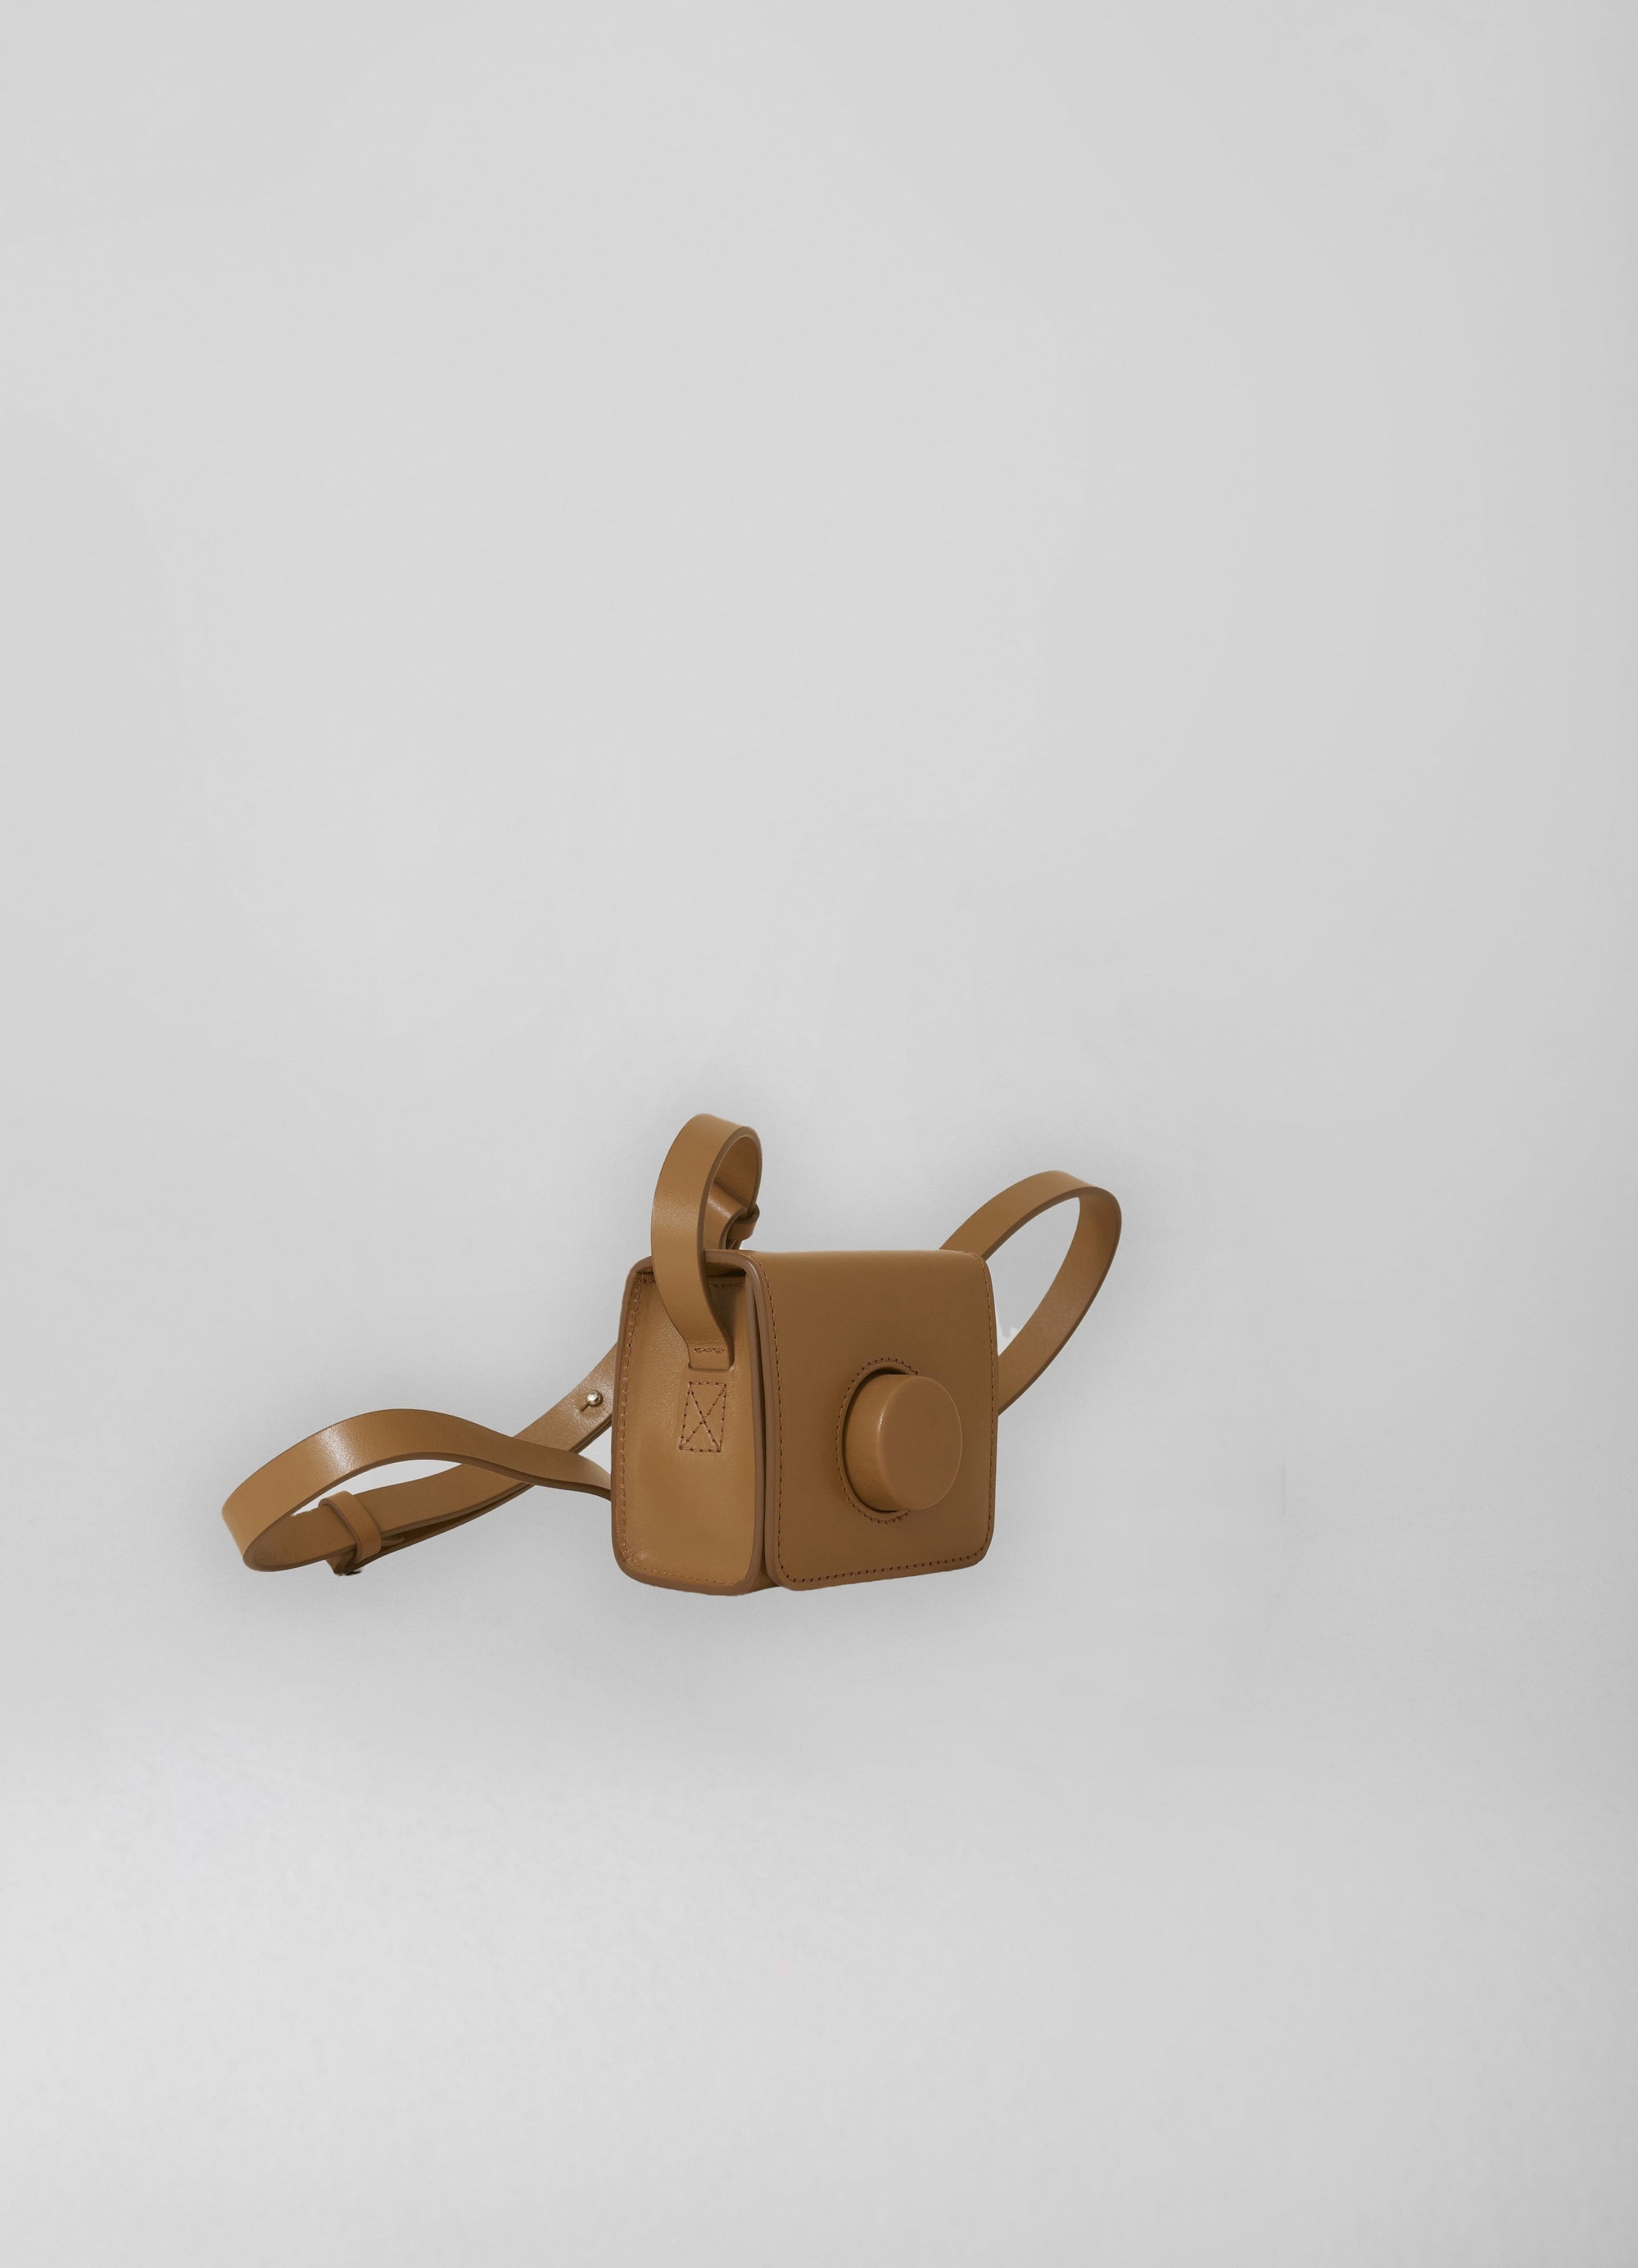 MINI CAMERA BAG / ONLINE EXCLUSIVE
VEGETABLE-TANNED LEATHER - 2